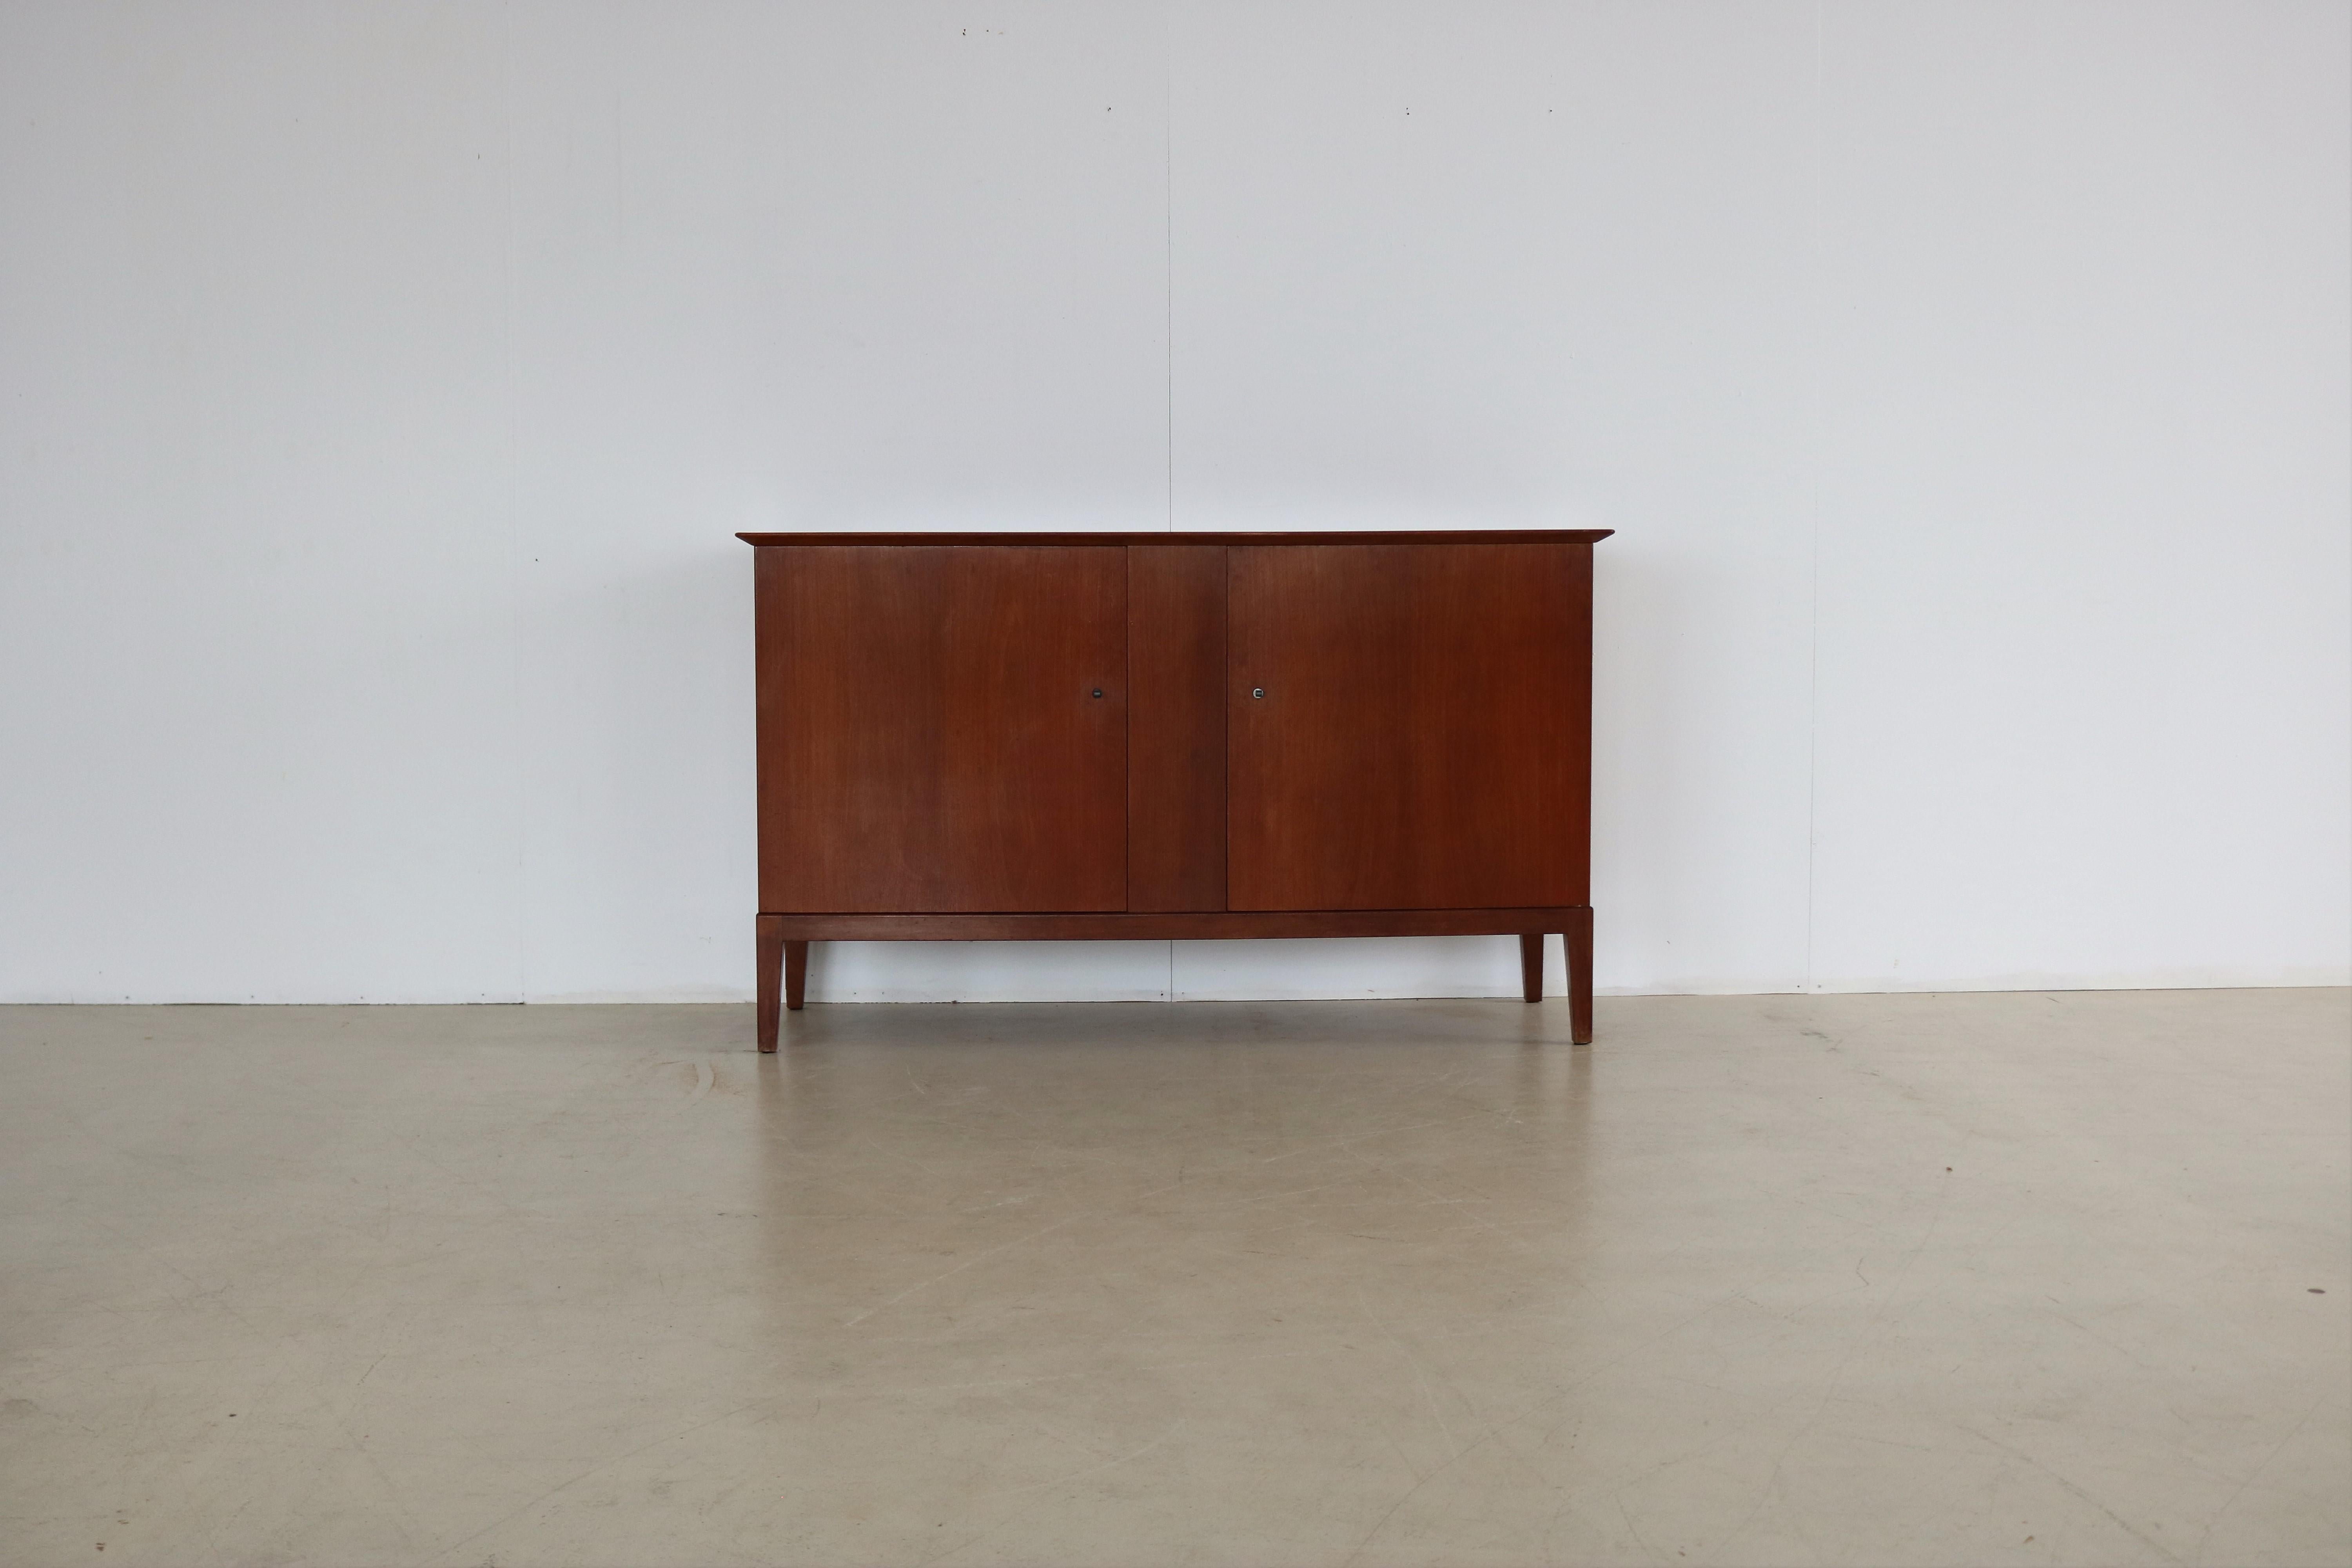 vintage sideboard  dresser  1940s  Fritz Hansen

period  1940s
designs  Fritz Hansen  Denmark
conditions  good  light signs of use
size  85.5 x 143.5 x 52.5 (HxWxD)

details  mahogany; matching cabinet available;

article number  1877